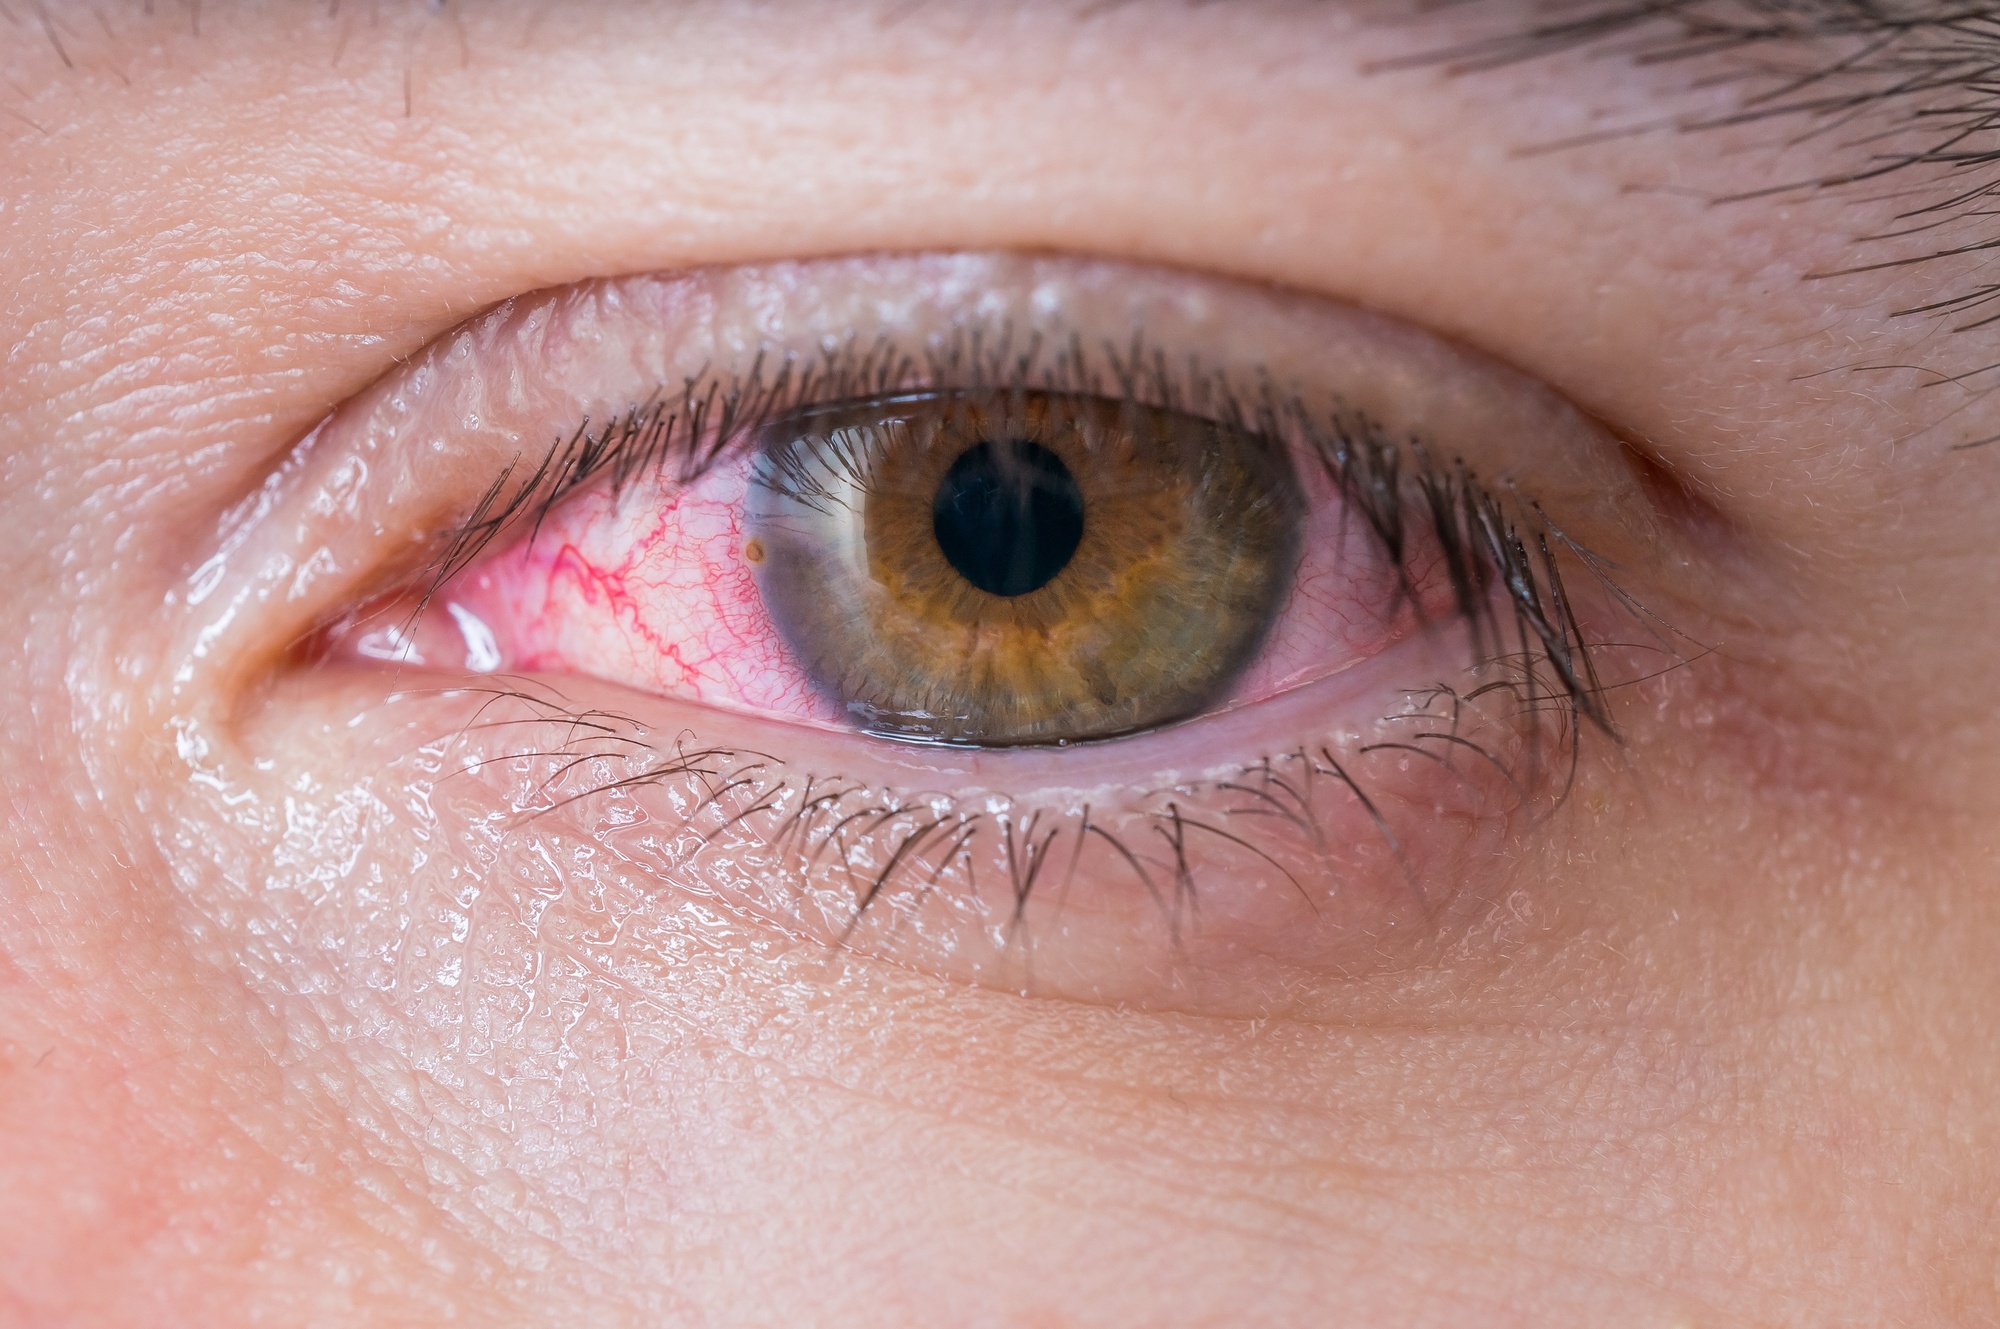 Do you want to know how to get rid of pink eye fast? Have you ever suffered from the condition? Read on to learn how to do it the right way.